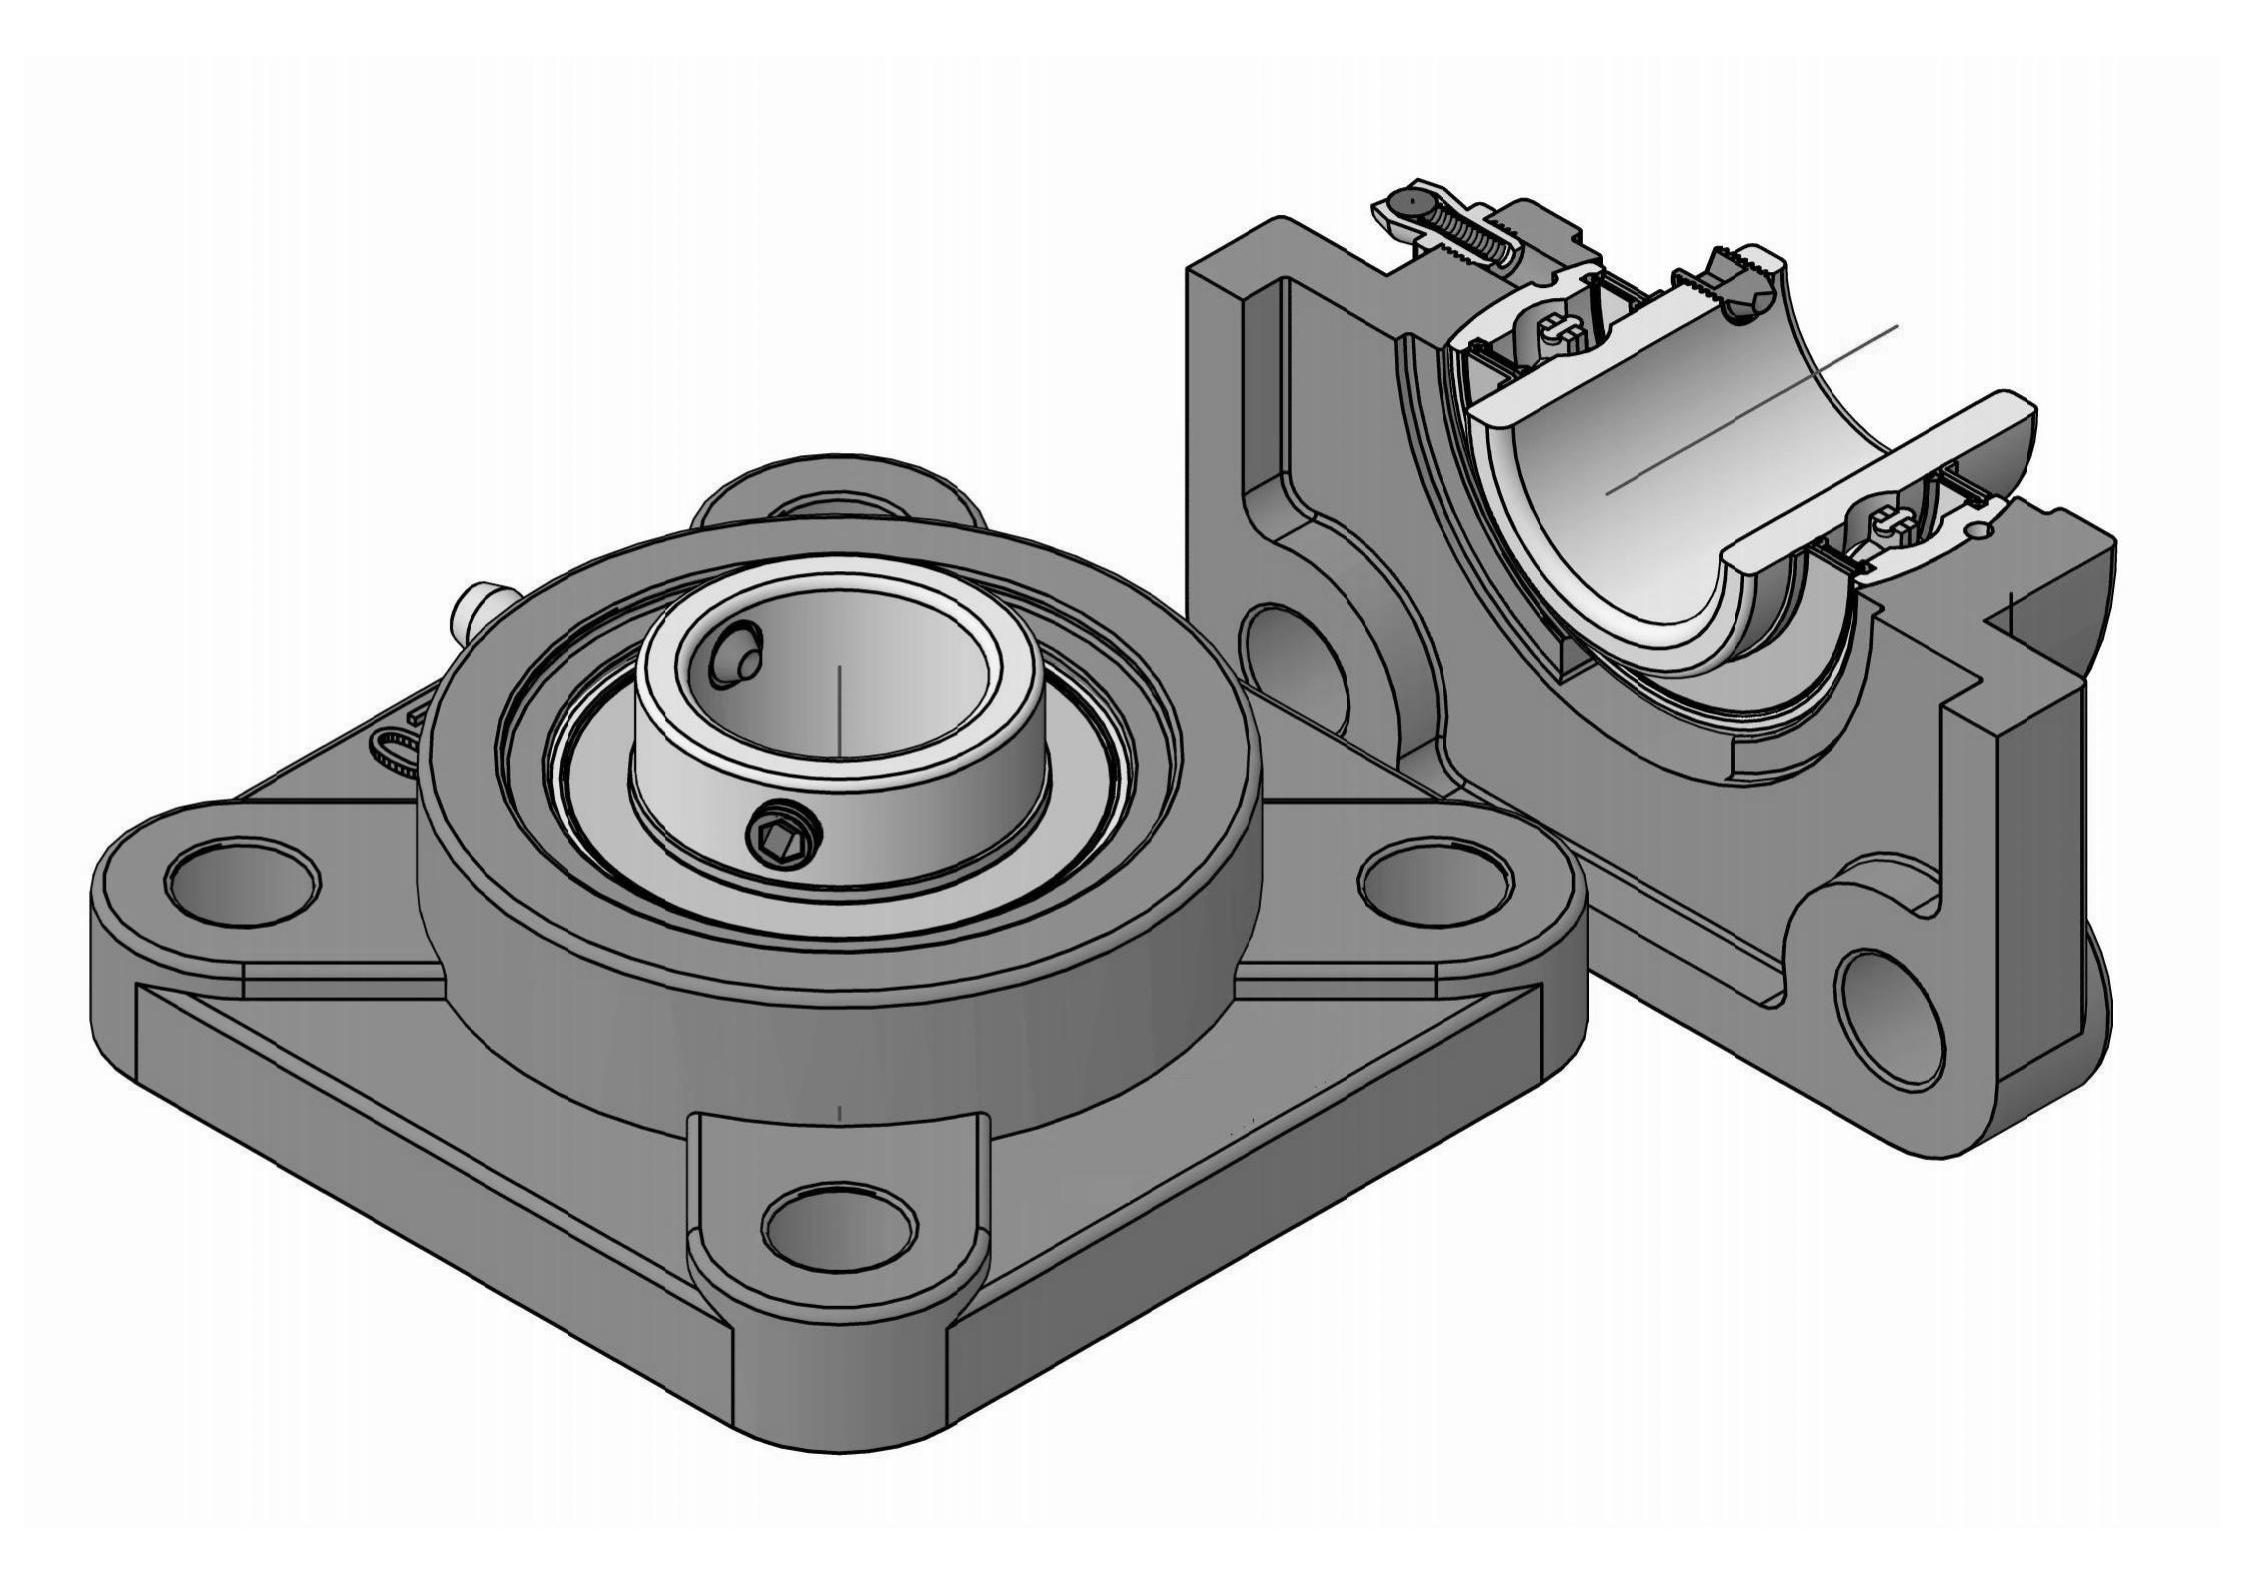 UCFX13-40 four Bolt Square flange bearing units with 2-1/2 inch bore